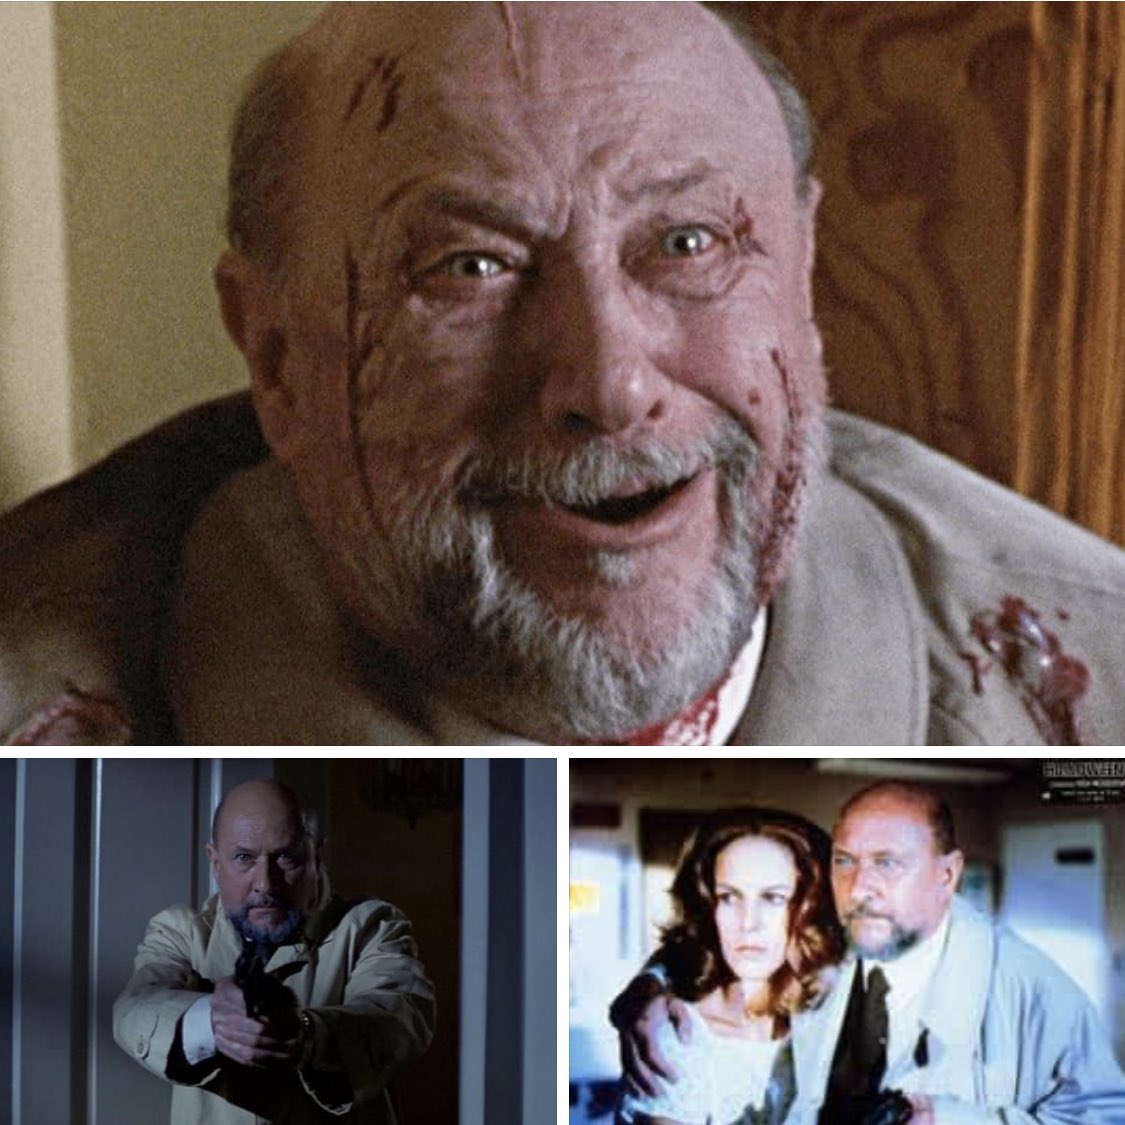 Today, we’re remembering the late AND legendary DONALD PLEASANCE who would have celebrated his 104th Birthday today! (born October 5th, 1919; passed February 2nd, 1995) 🎬🎃 RIP.

#DonaldPleasence #Halloween1978 #HalloweenII #Halloween4 #DoctorLoomis #Halloween #MichaelMyers